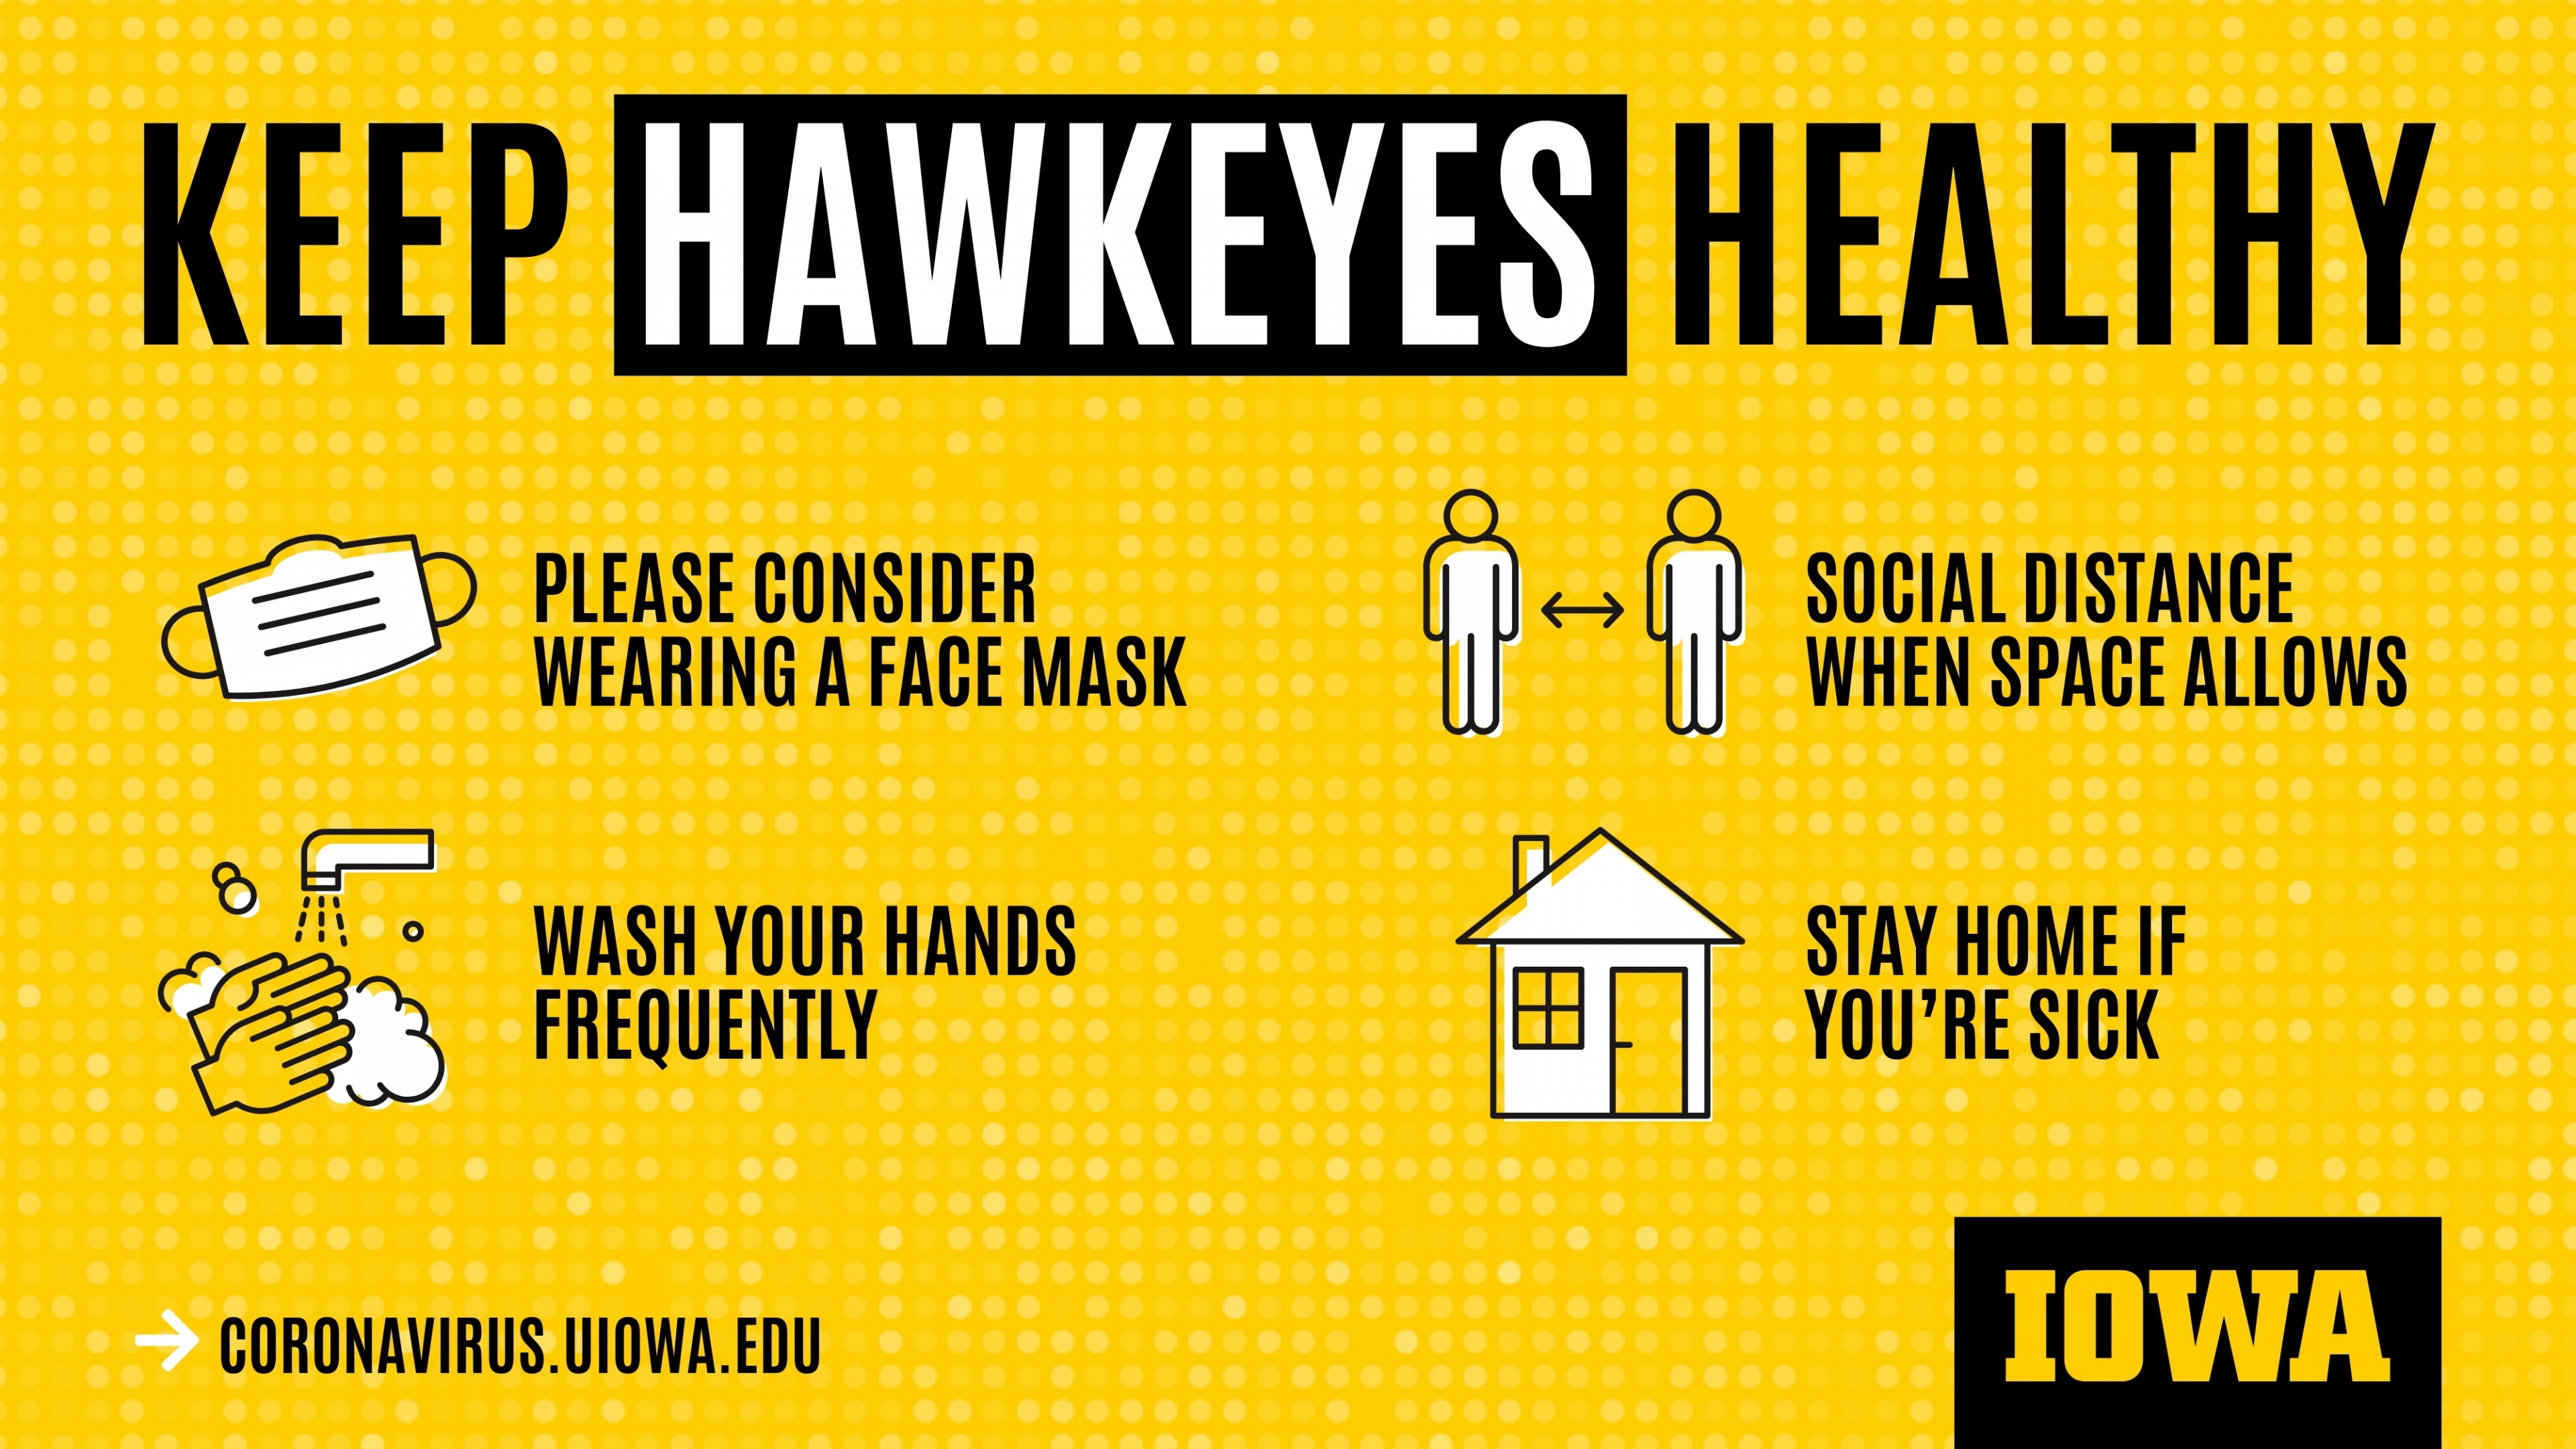 Keep Hawkeyes Healthy. Please consider wearing a face mask. Social distance when space allows. Wash your hands frequently. Stay home if you're sick. coronavirus.uiowa.edu.